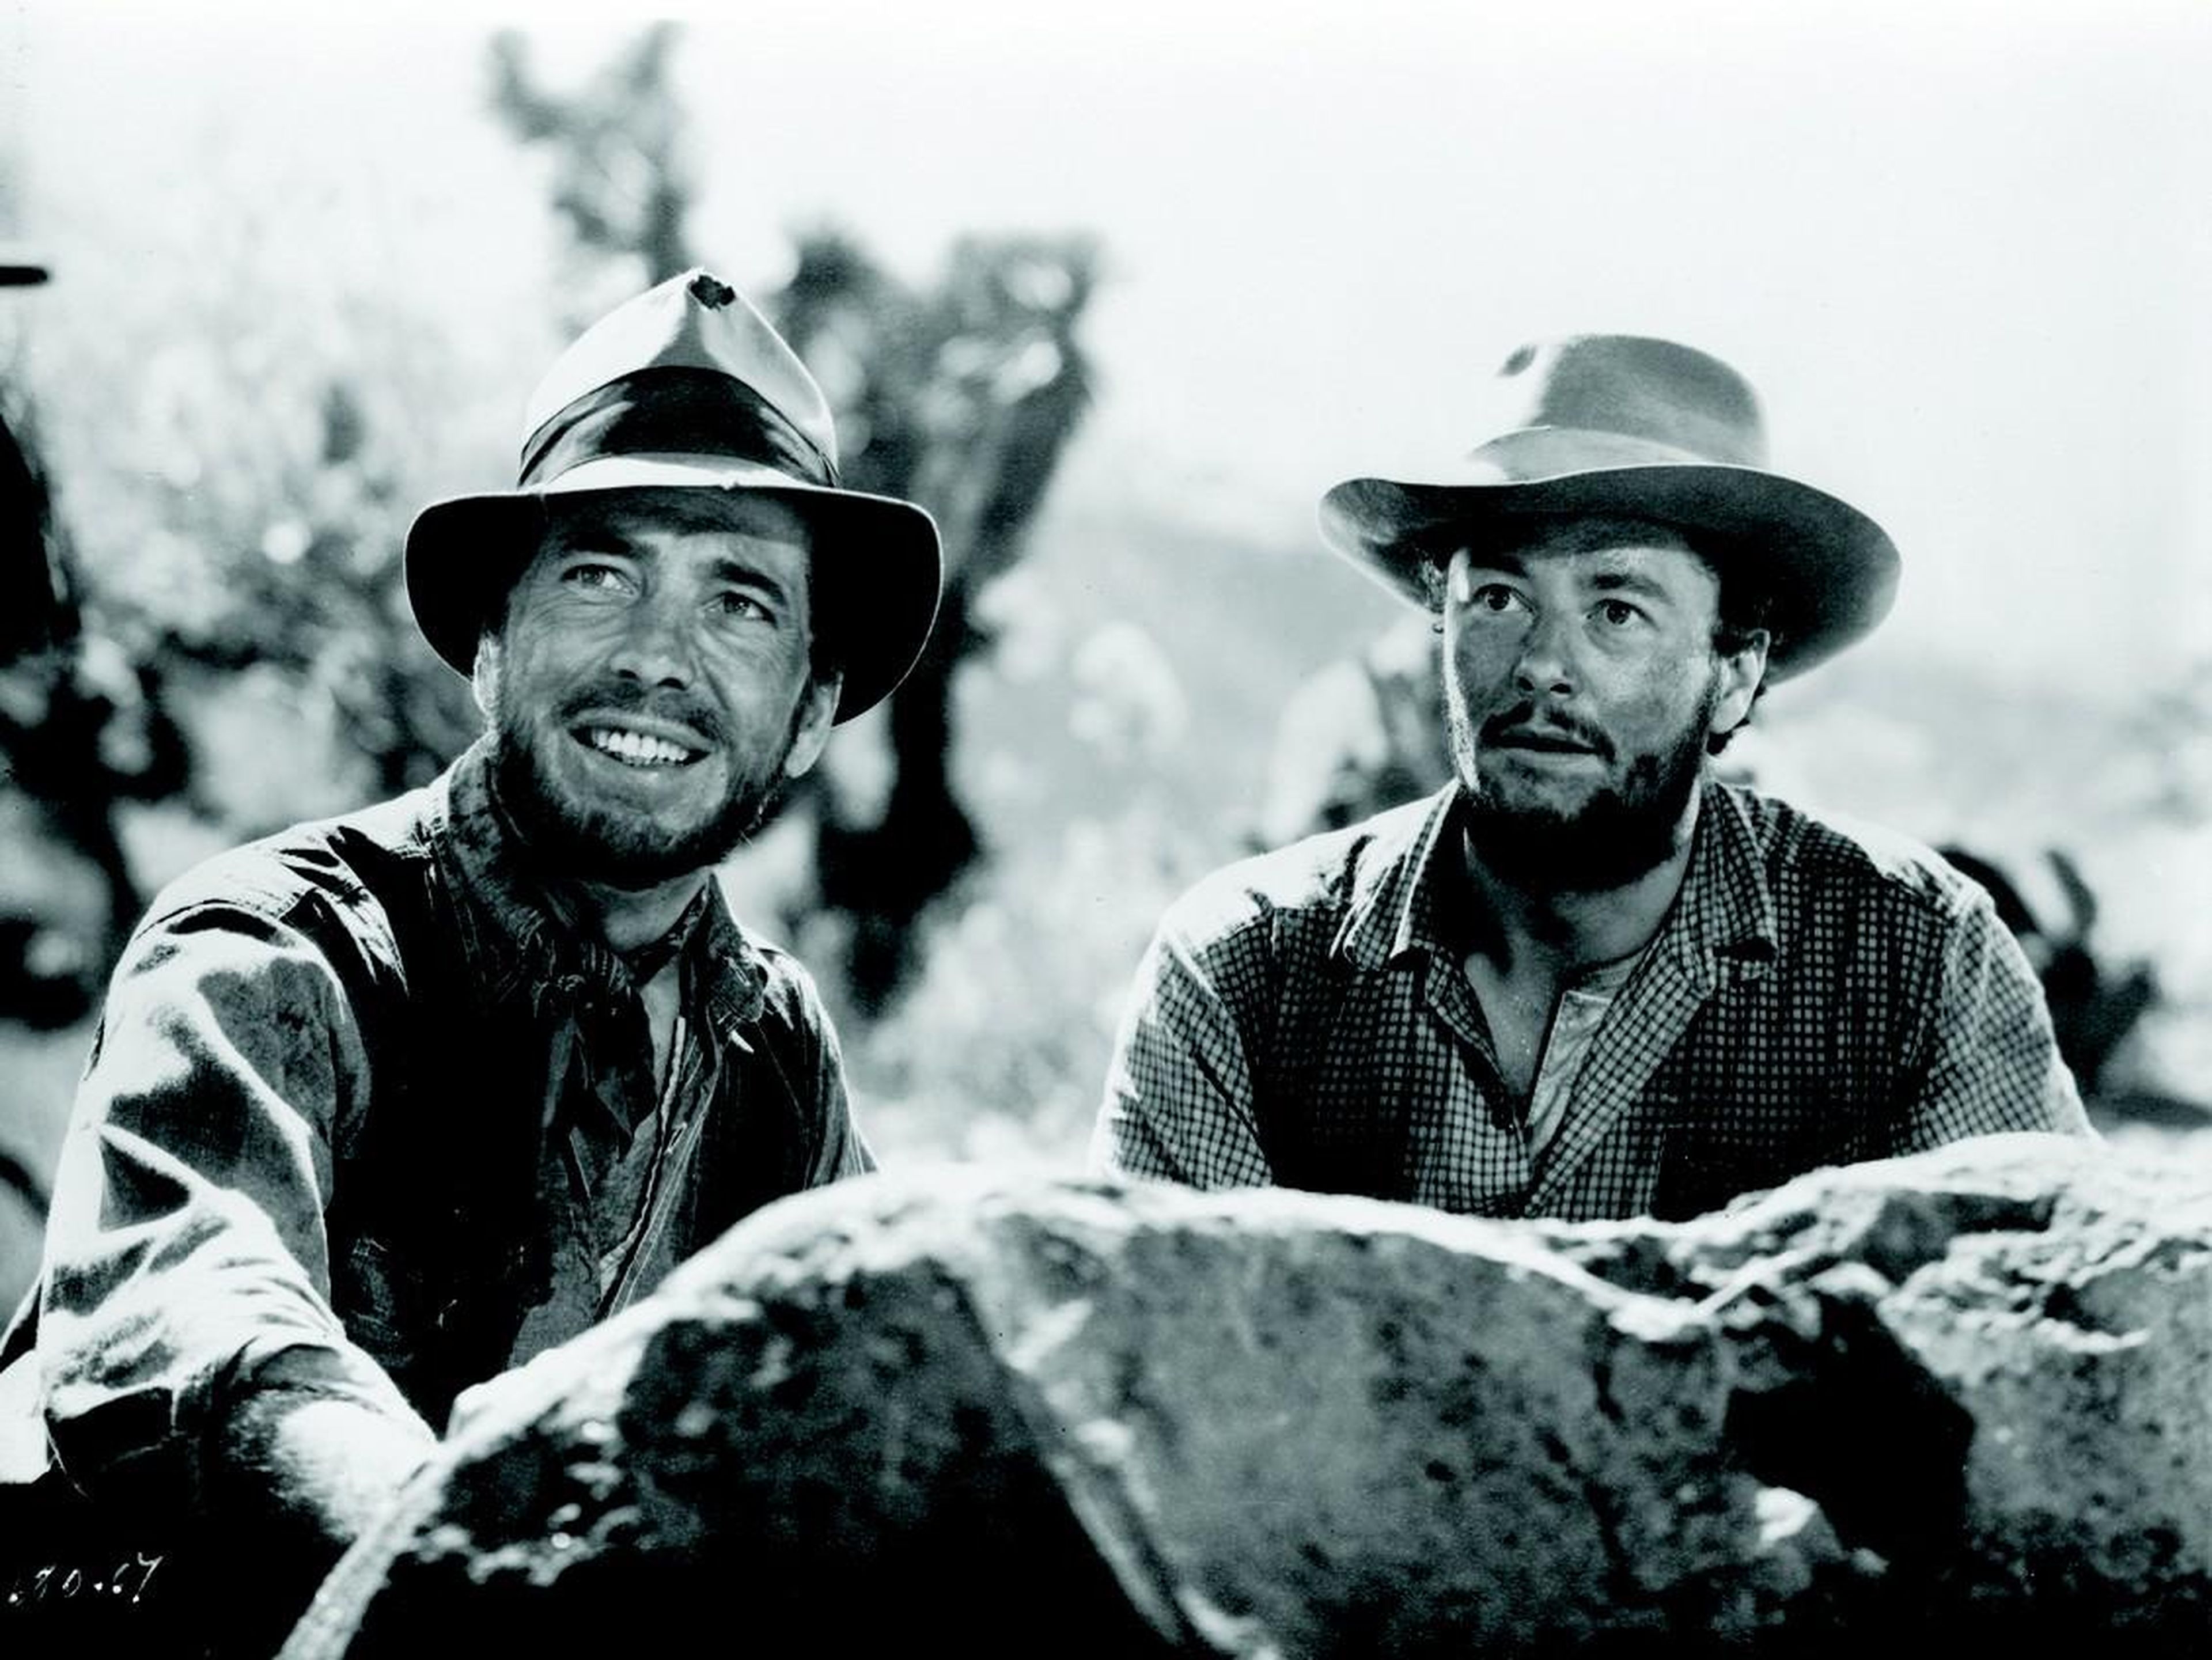 8. "The Treasure of the Sierra Madre" (1948)